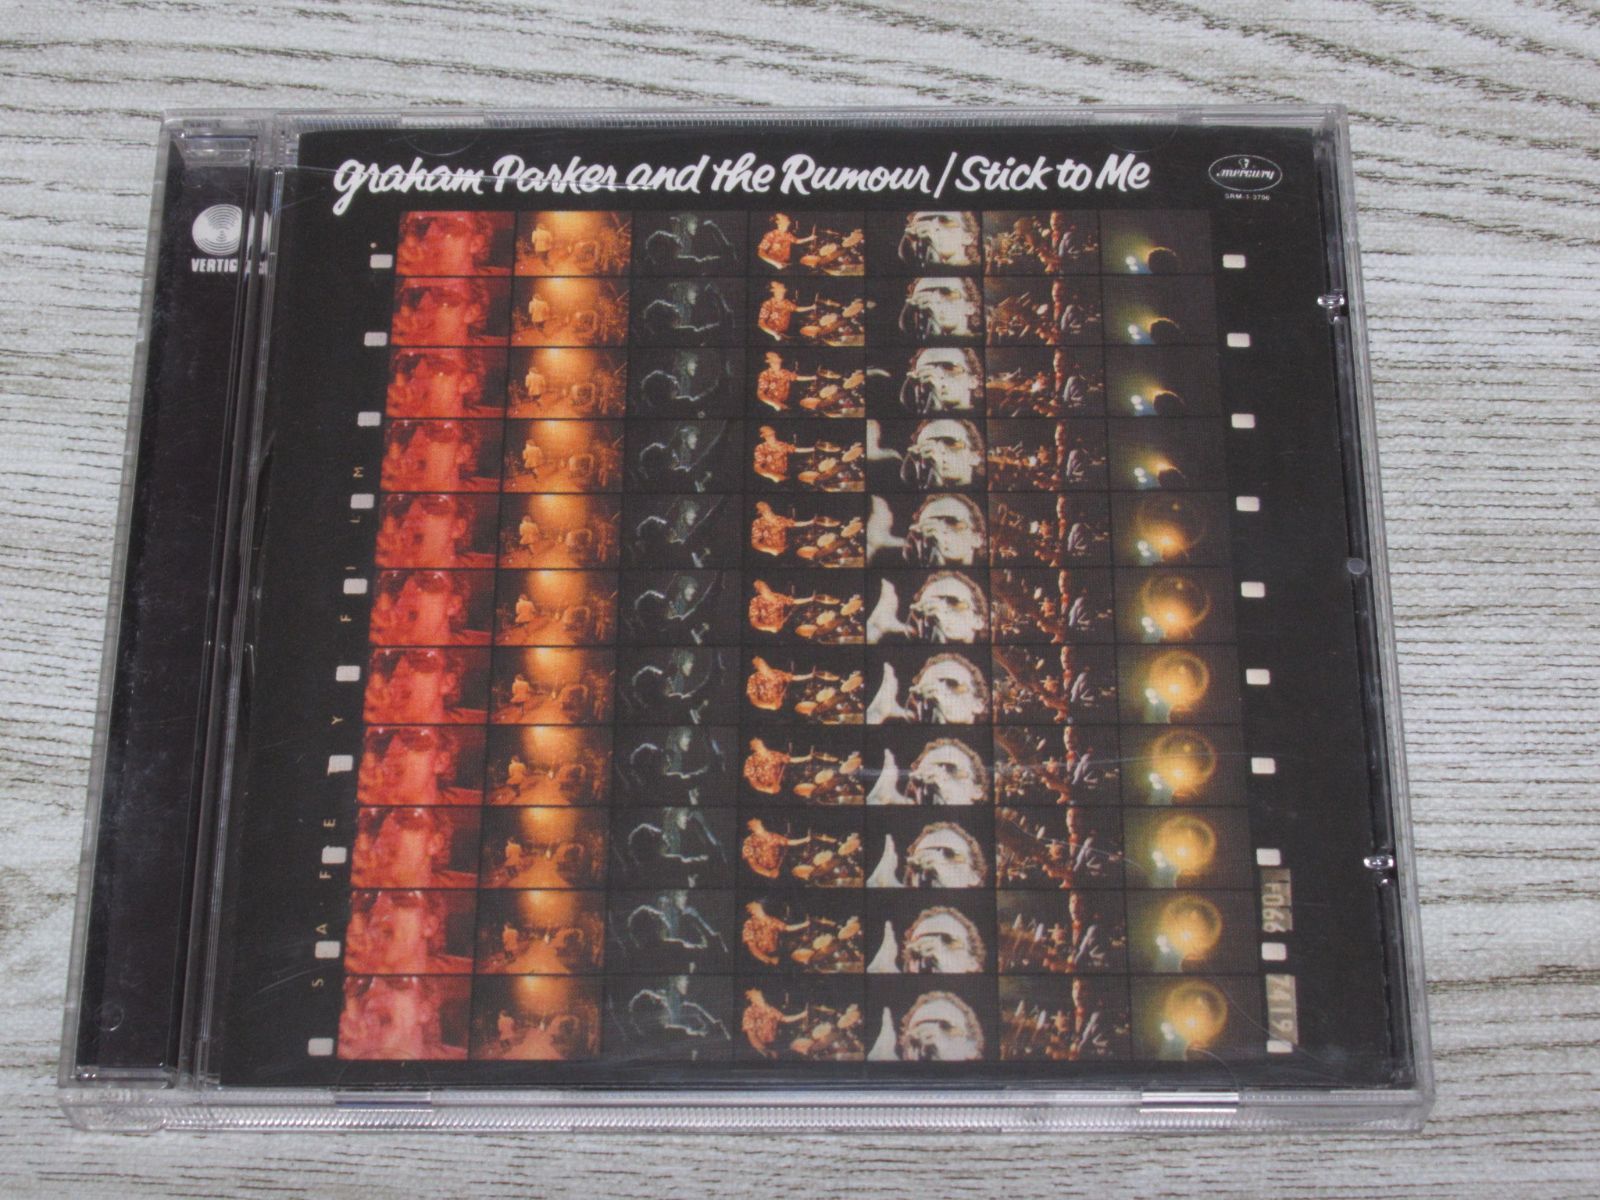 CD　GRAHAM PARKER AND THE RUMOUR　STICK TO ME　MADE IN THE EU 548 680-2 全10曲  グレアム・パーカー ザ・ルーモア